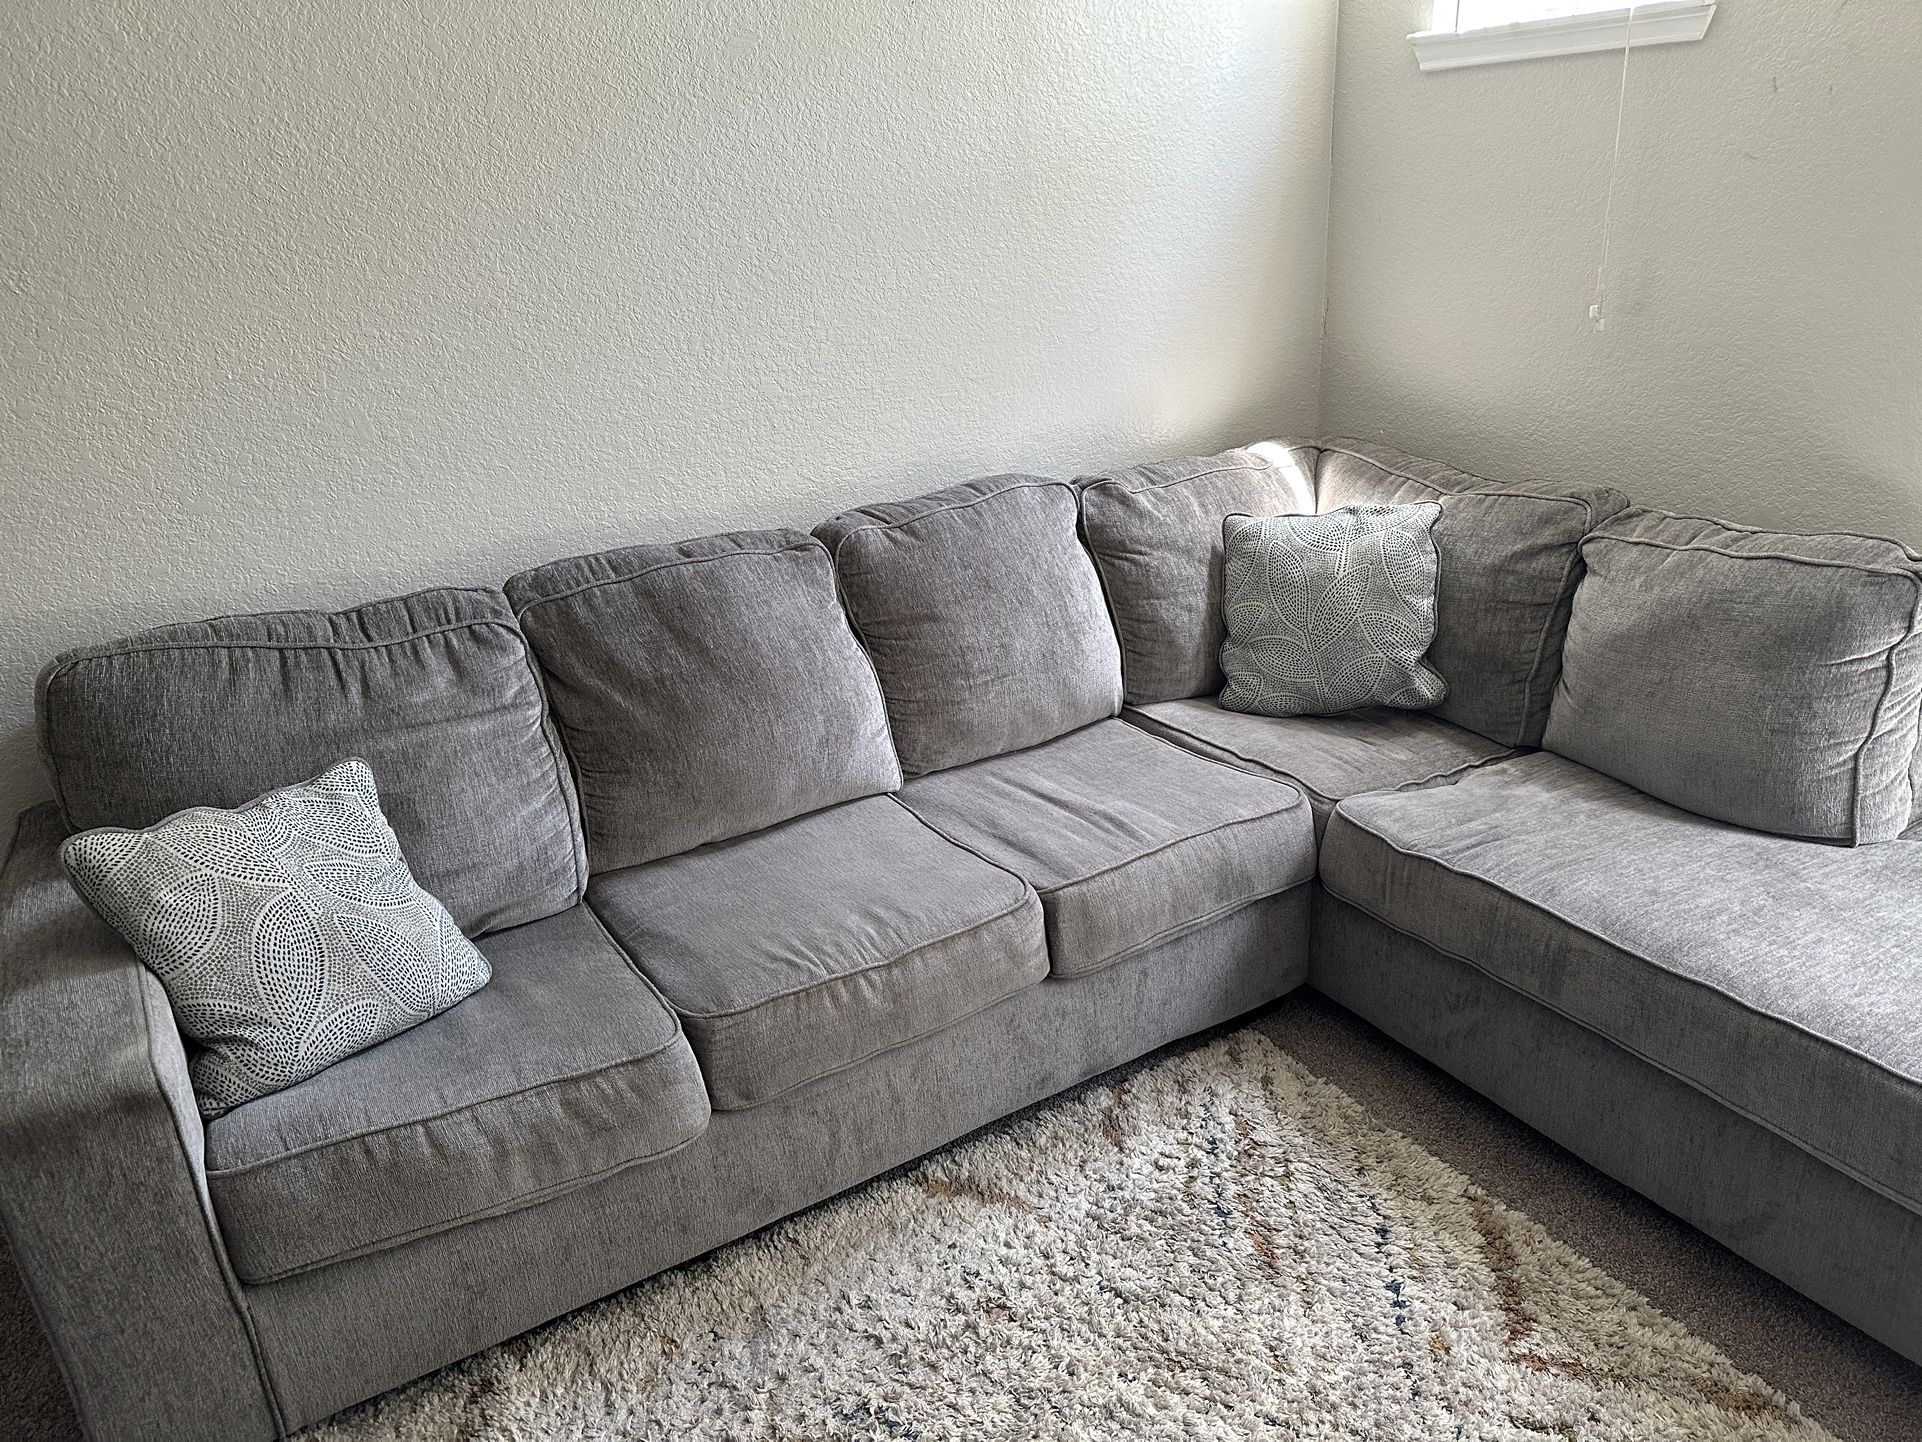 Couch For Sale